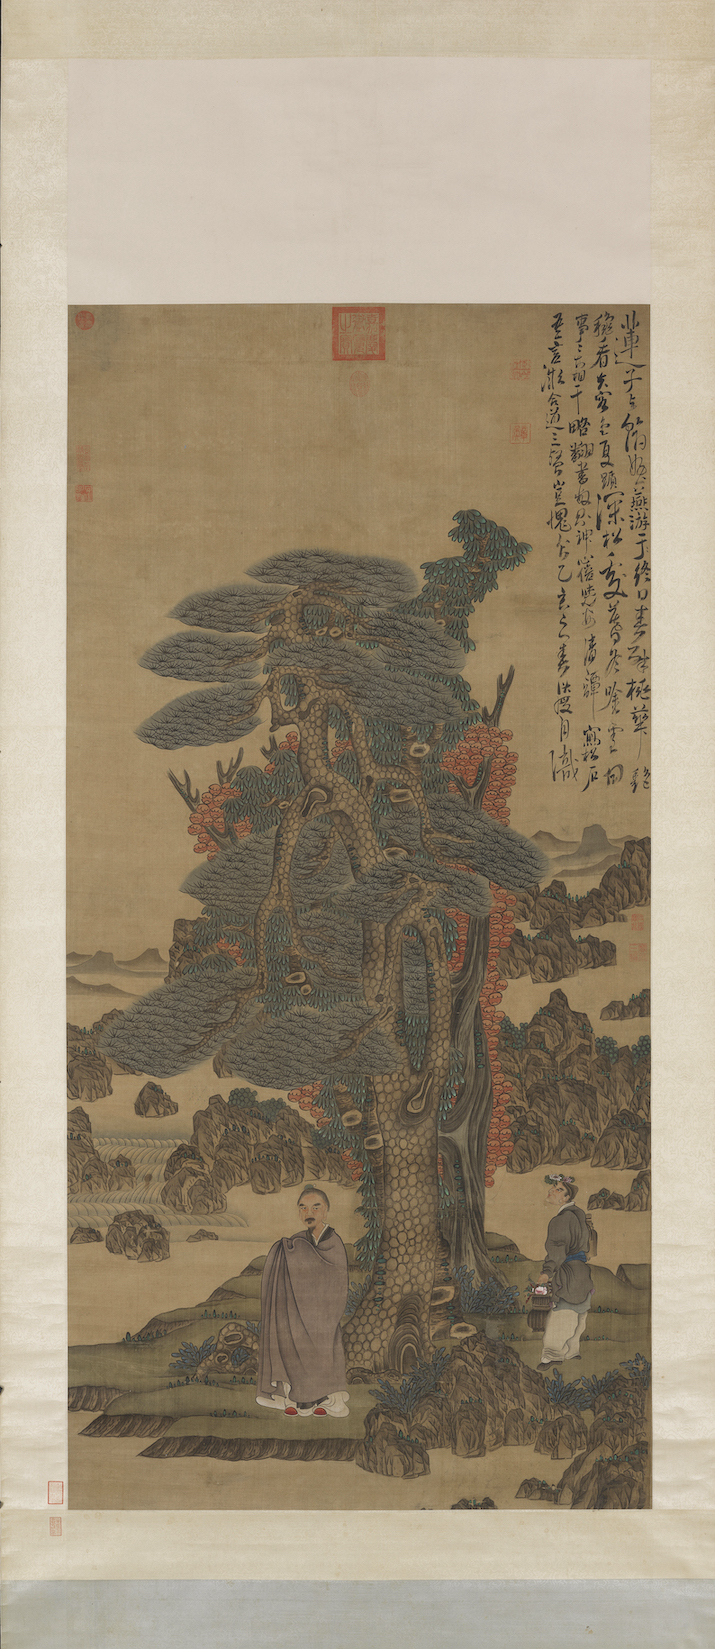 Chen Hongshou 陳洪綬 (1598–1652) and studio, An Immortal Under Pines, dated 1635. Hanging scroll, ink and color on silk, 202.1 x 97.8 cm (National Palace Museum, Taipei)